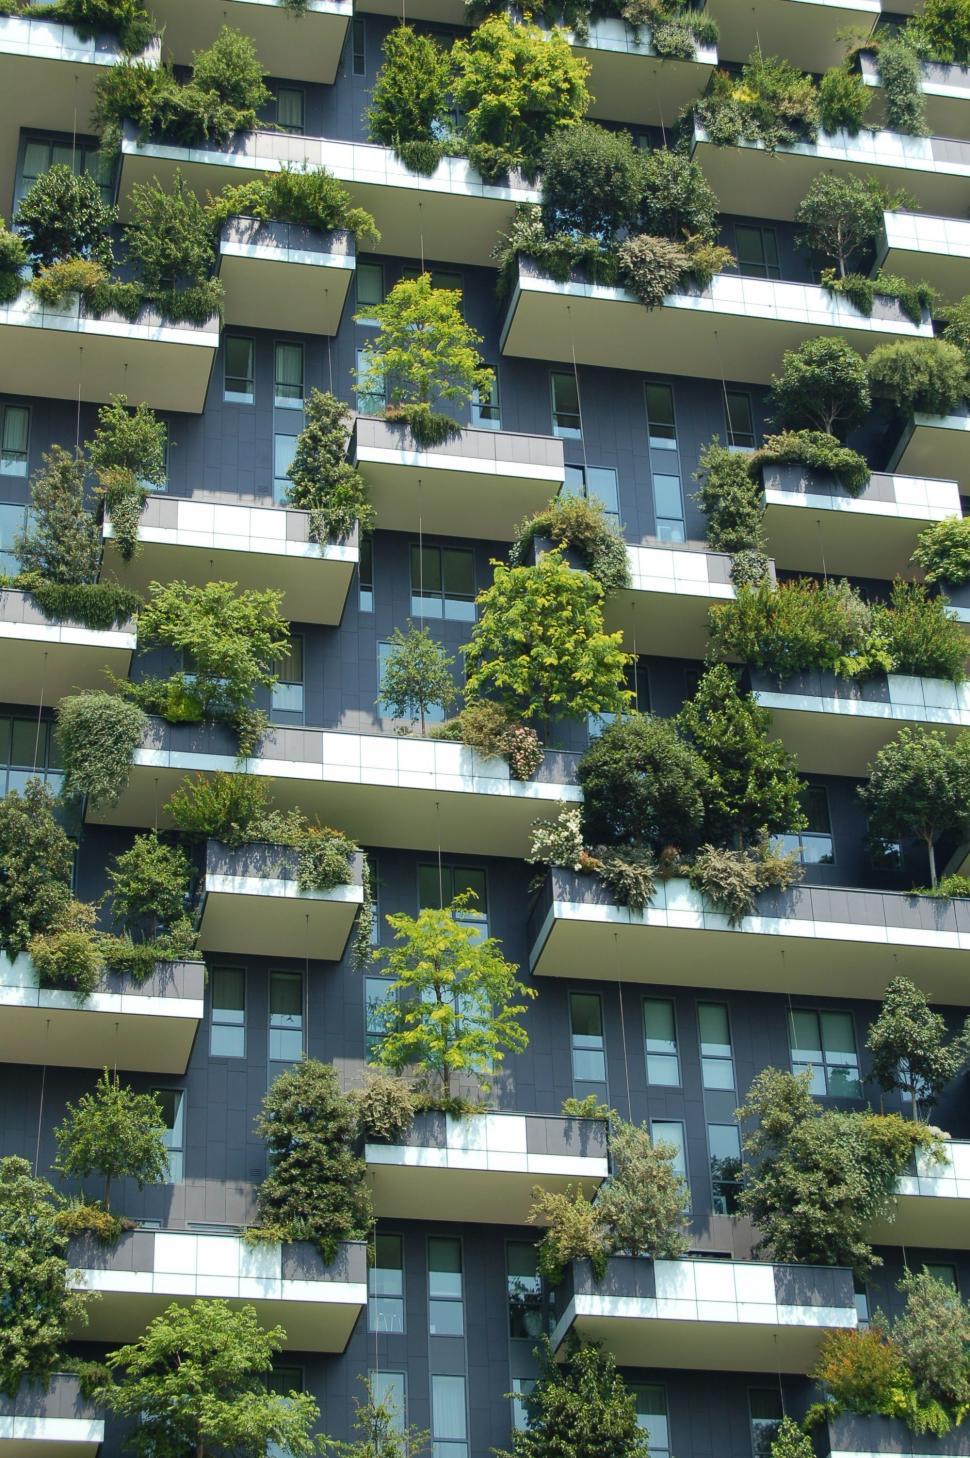 Free Image of Building with plants - Green architecture 